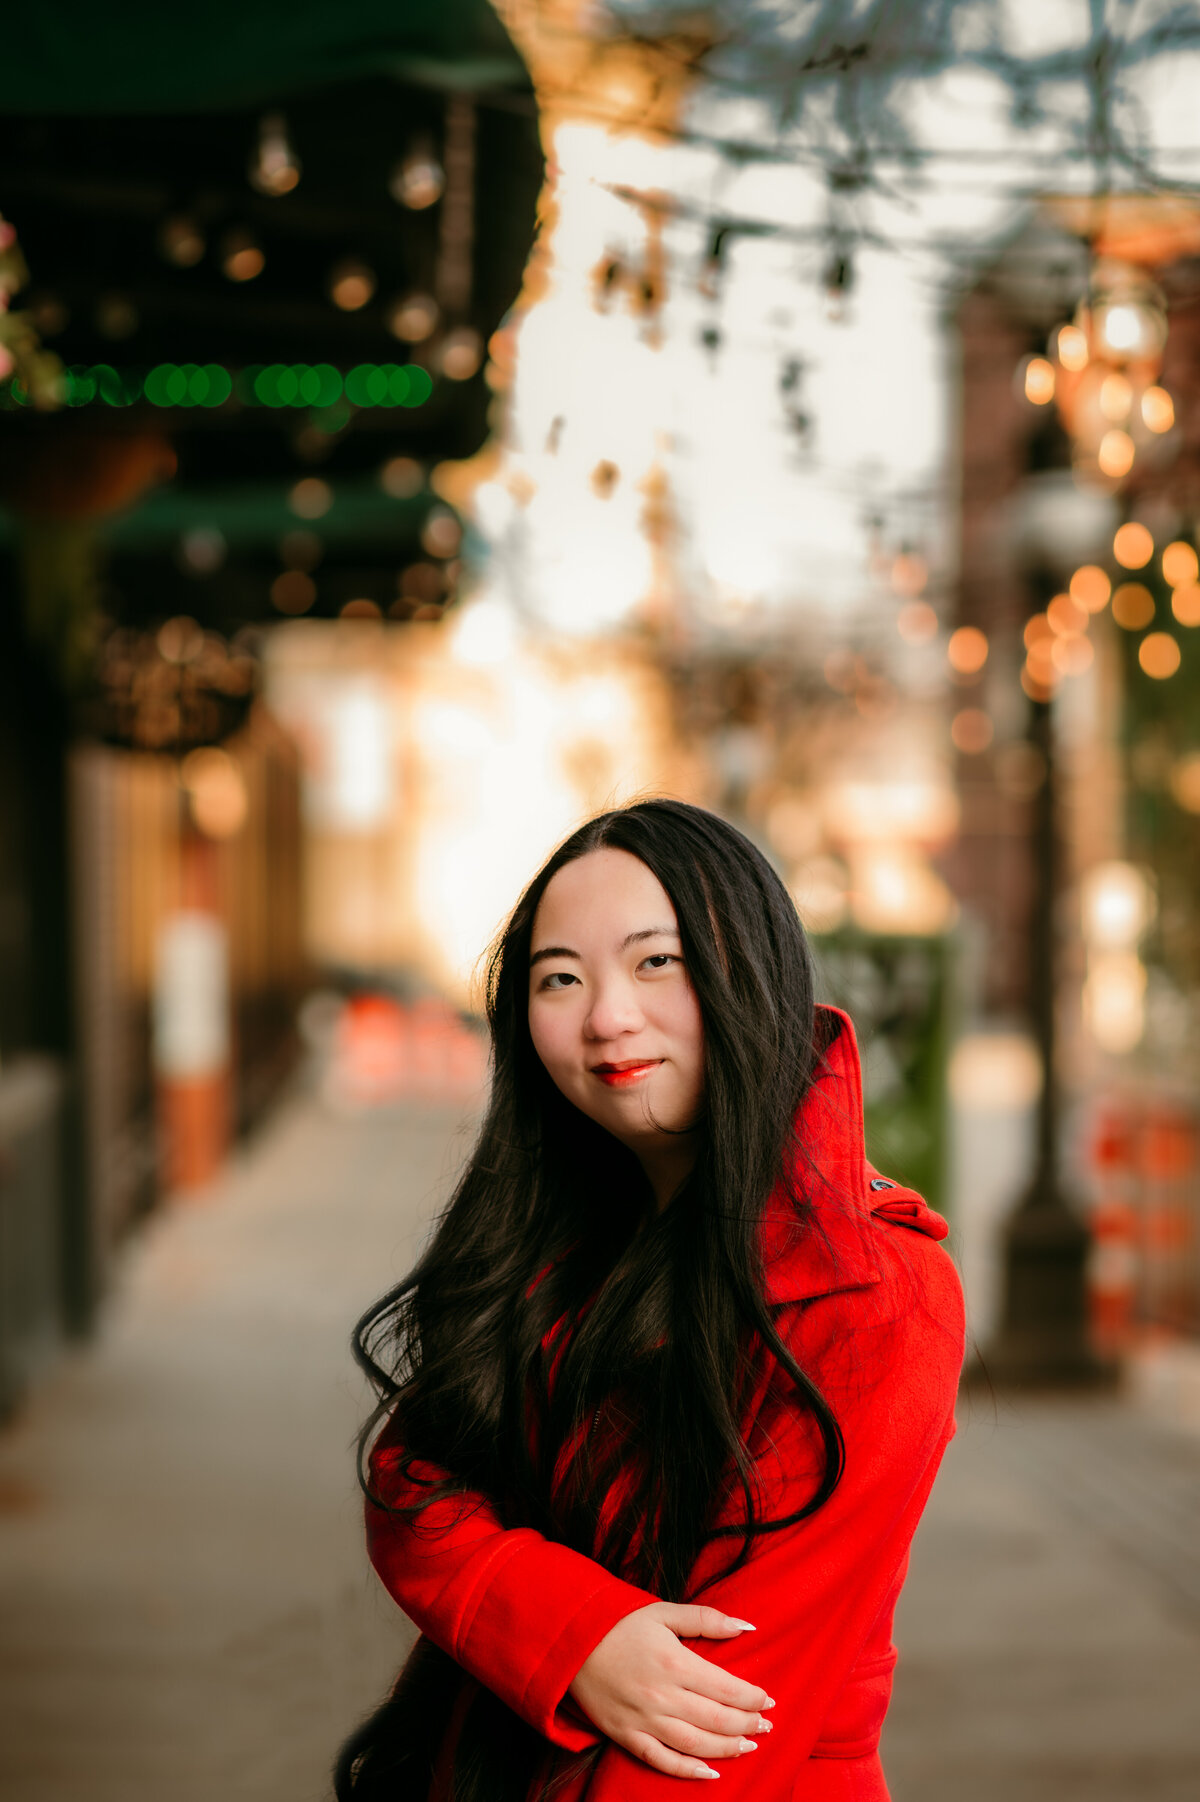 Embark on vibrant vistas with Shannon Kathleen Photography's Minneapolis senior portraits. Revel in colorful majesty and craft everlasting memories. Schedule today.